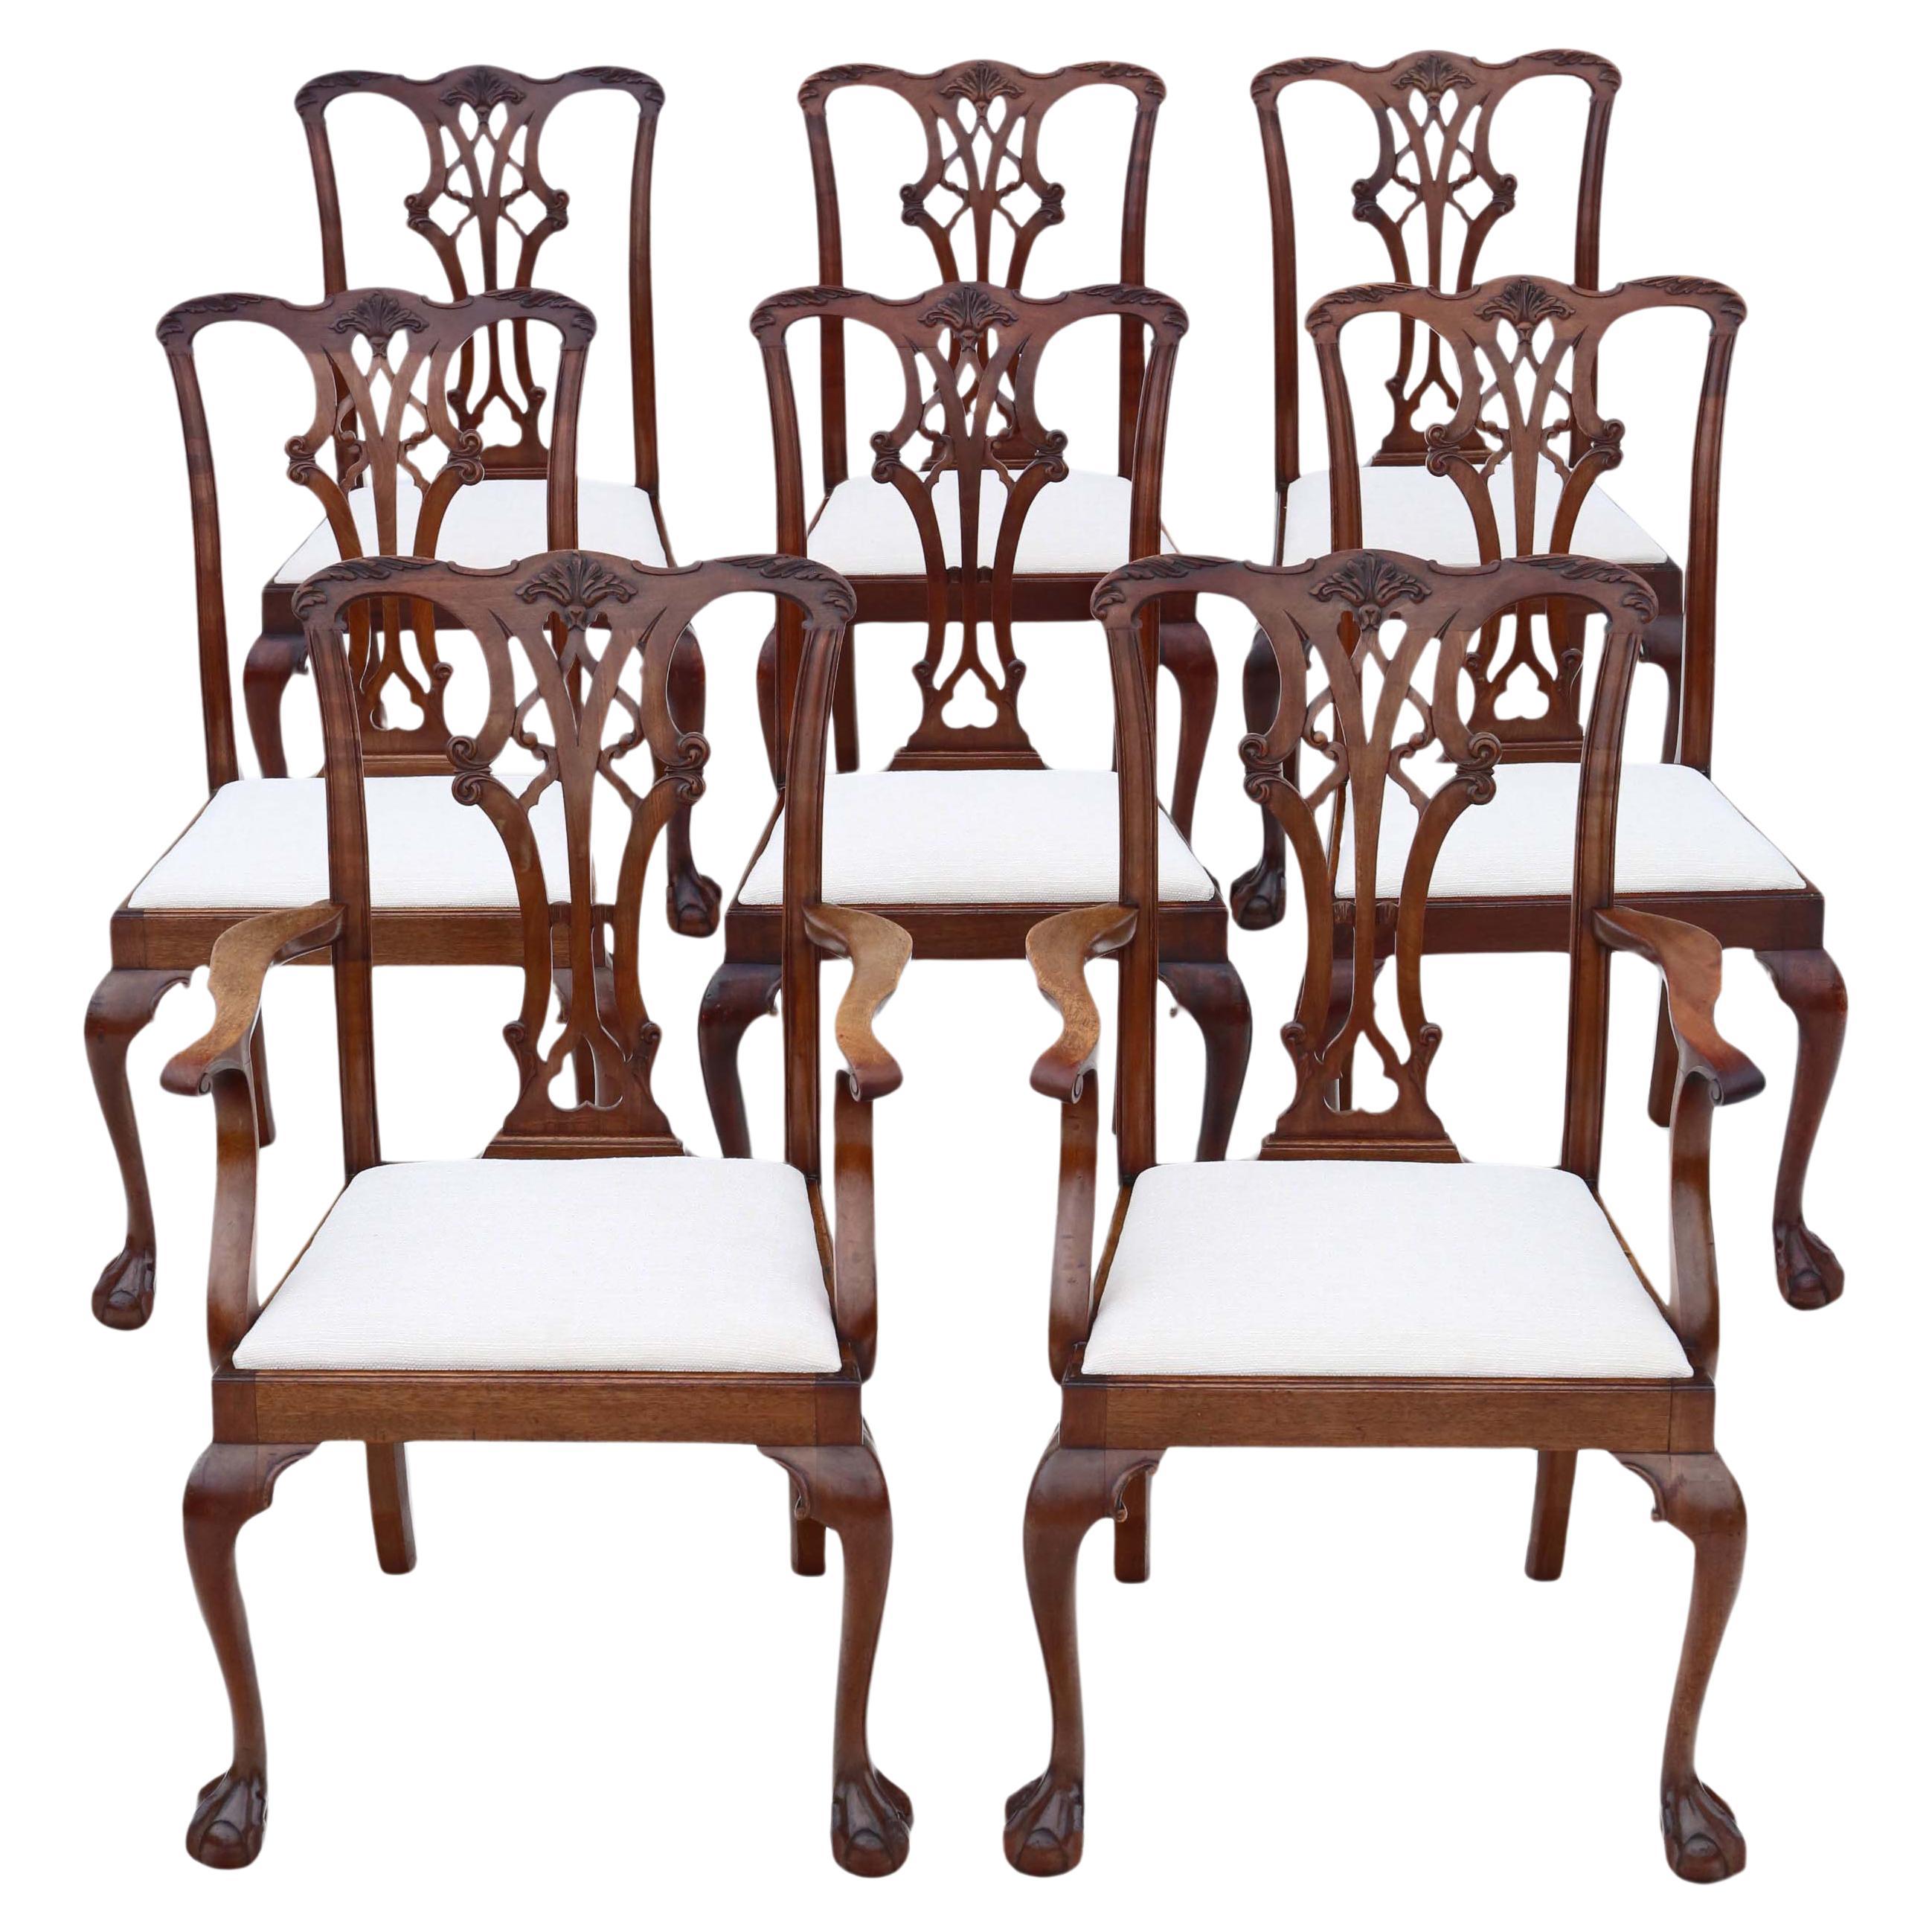 Georgian Revival Mahogany Dining Chairs: Set of 8 (6+2), Antique Quality, C1910 For Sale